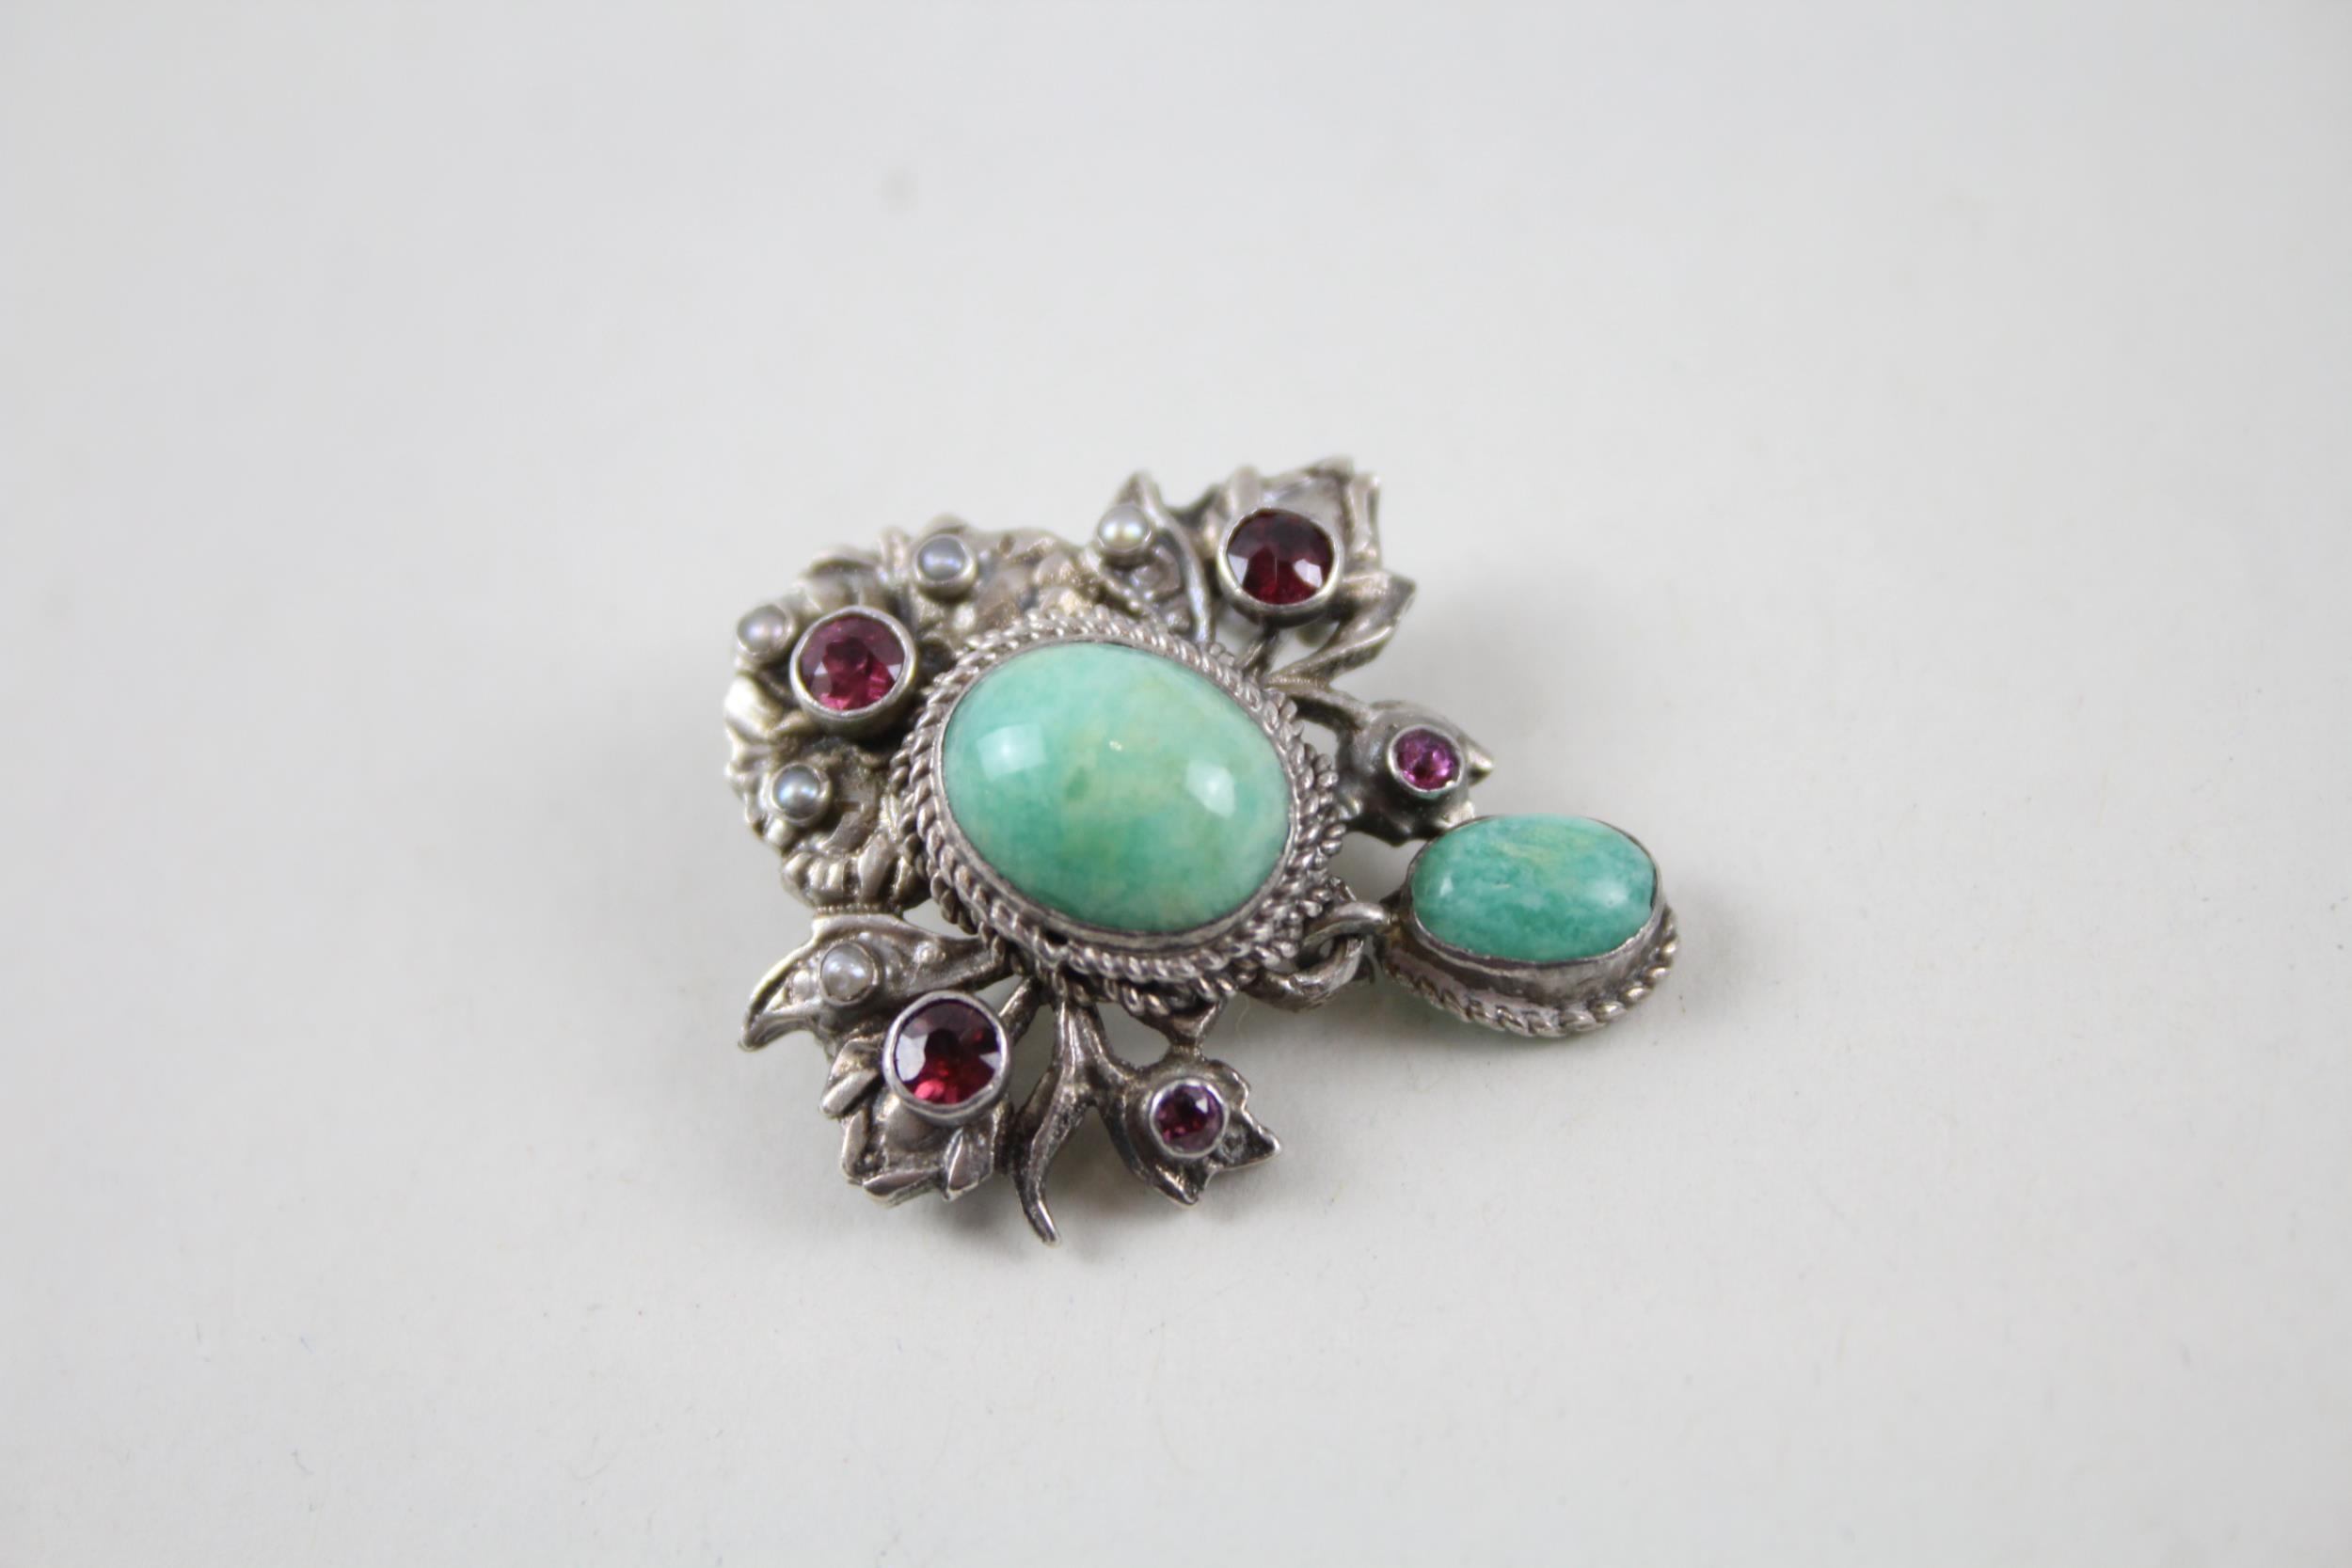 Silver Austro-Hungarian brooch set with gemstone and seed pearl (6g) - Image 7 of 9